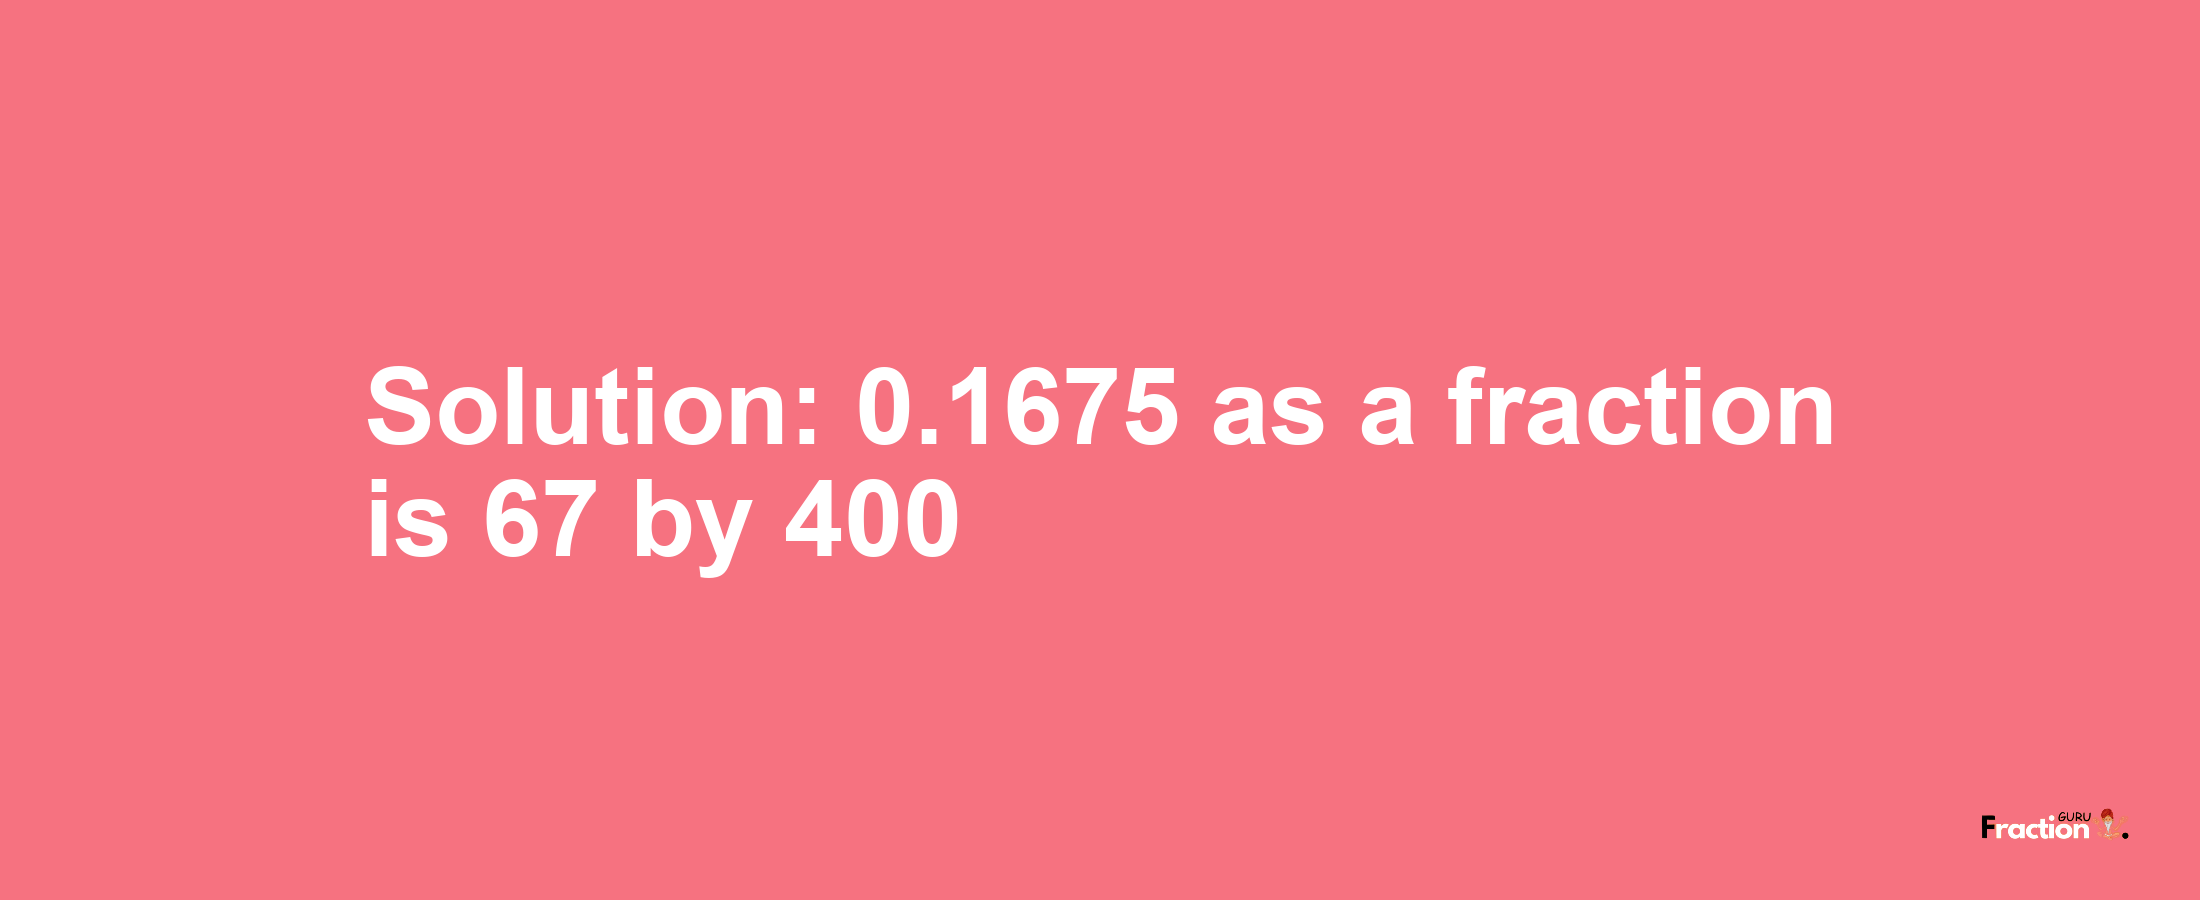 Solution:0.1675 as a fraction is 67/400